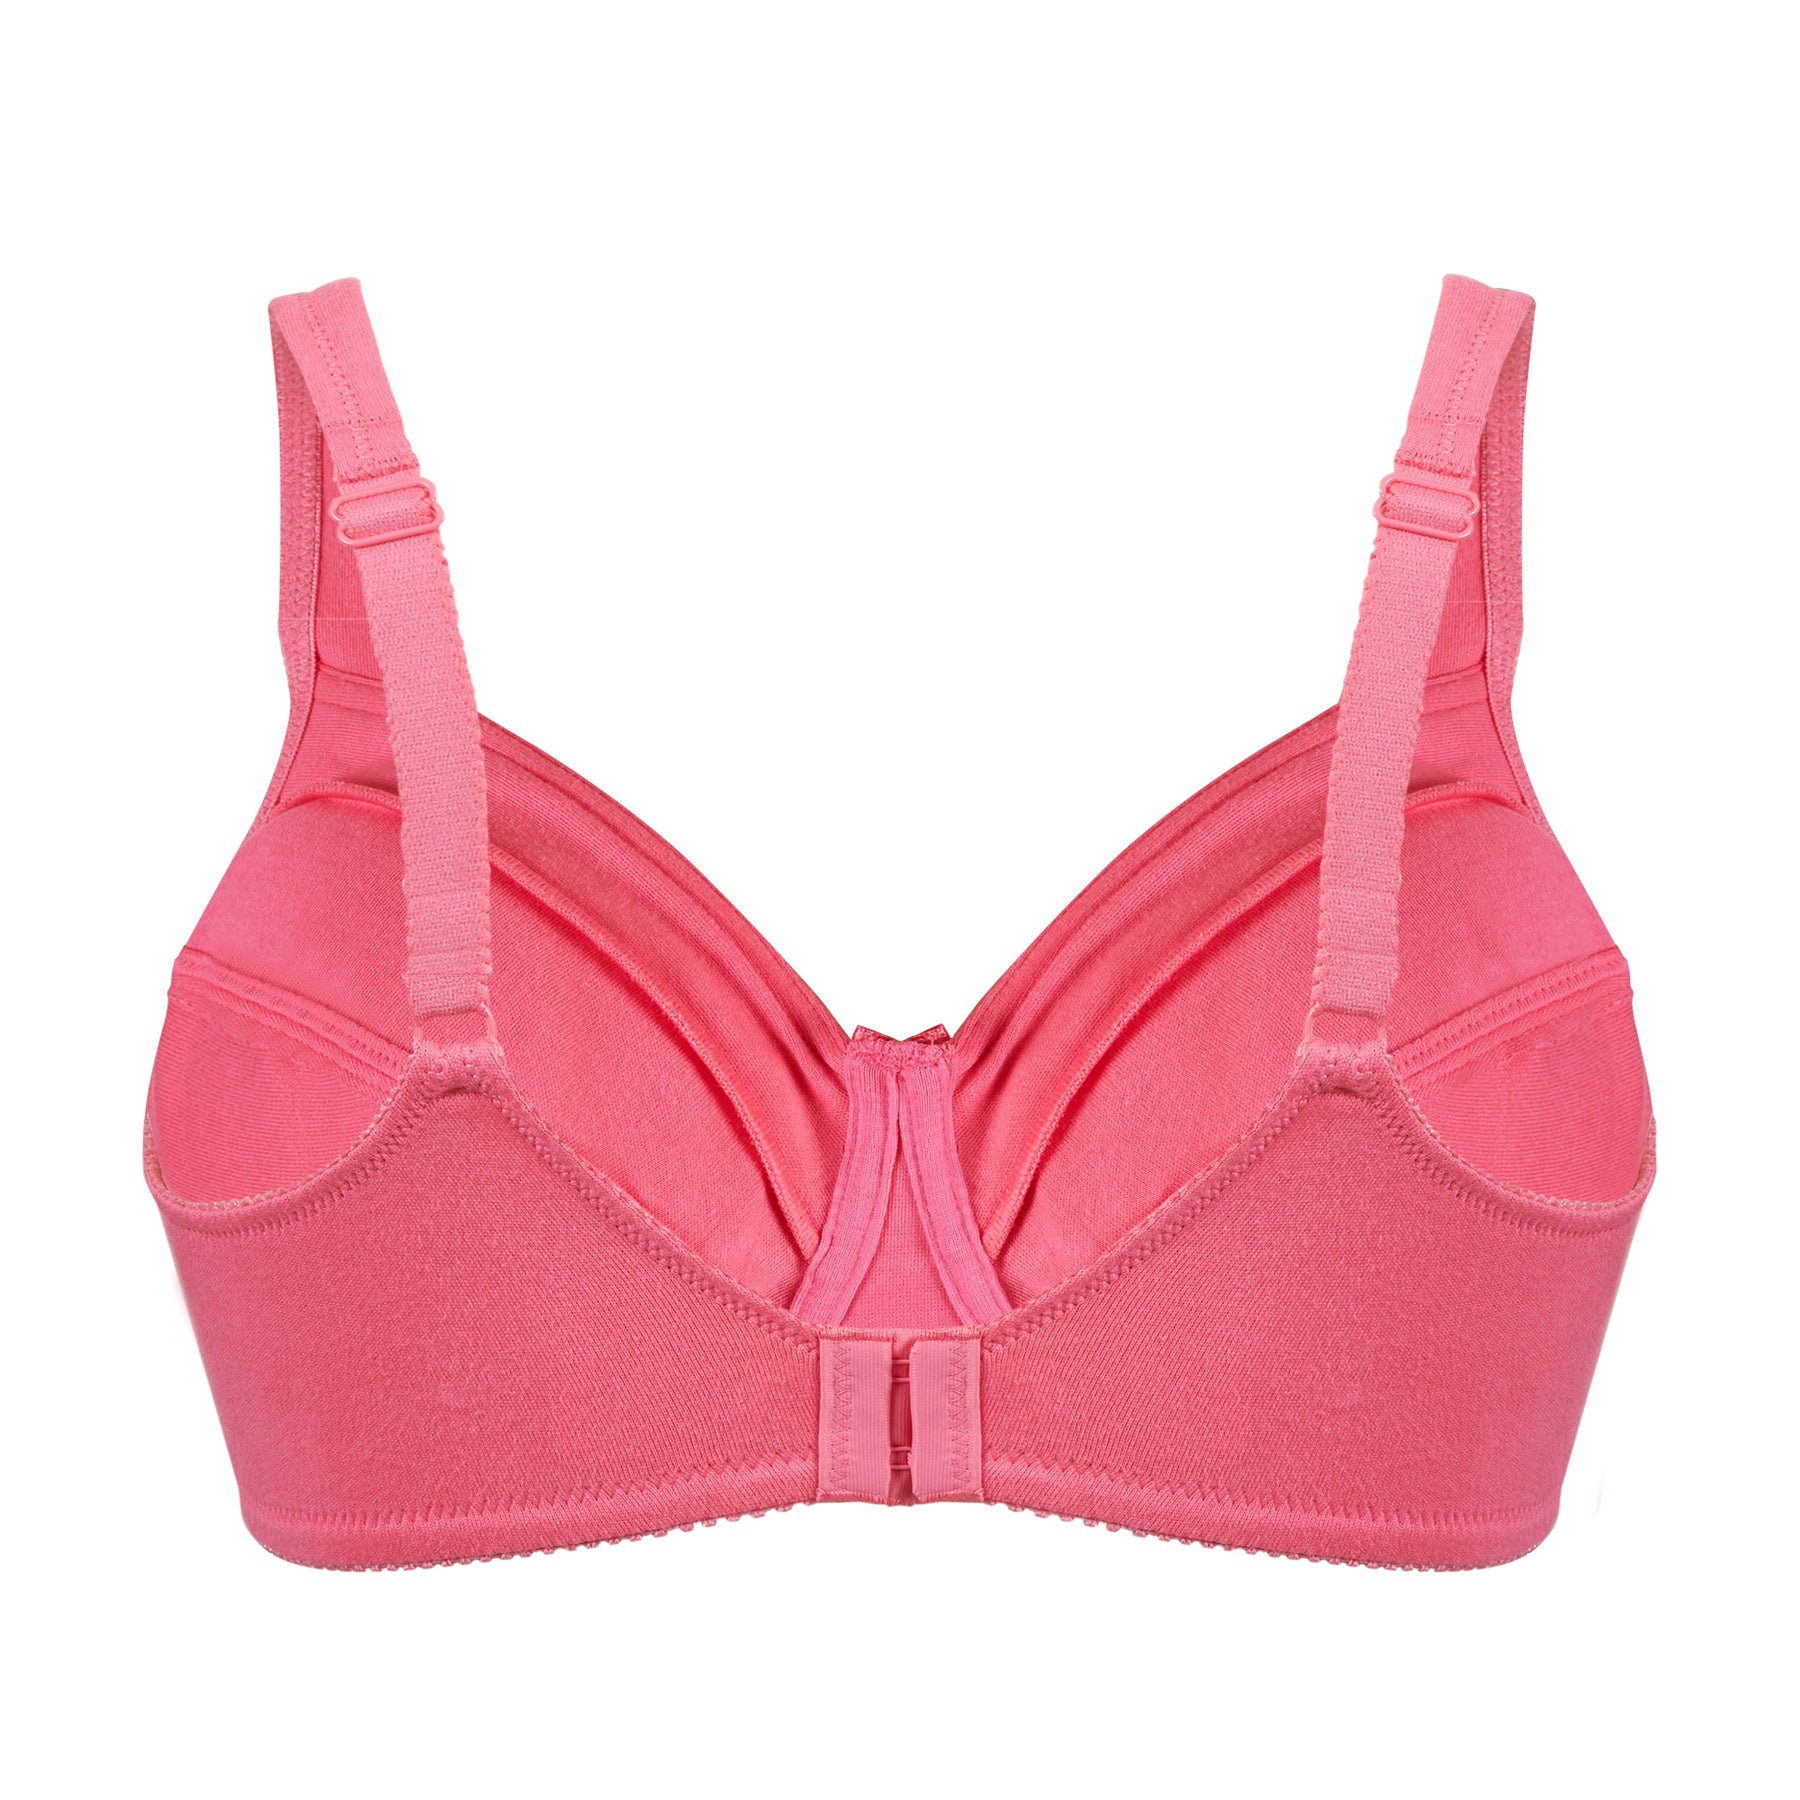 Papillon Unlined underwired cotton bra CUP B S335: for sale at 10.19€ on